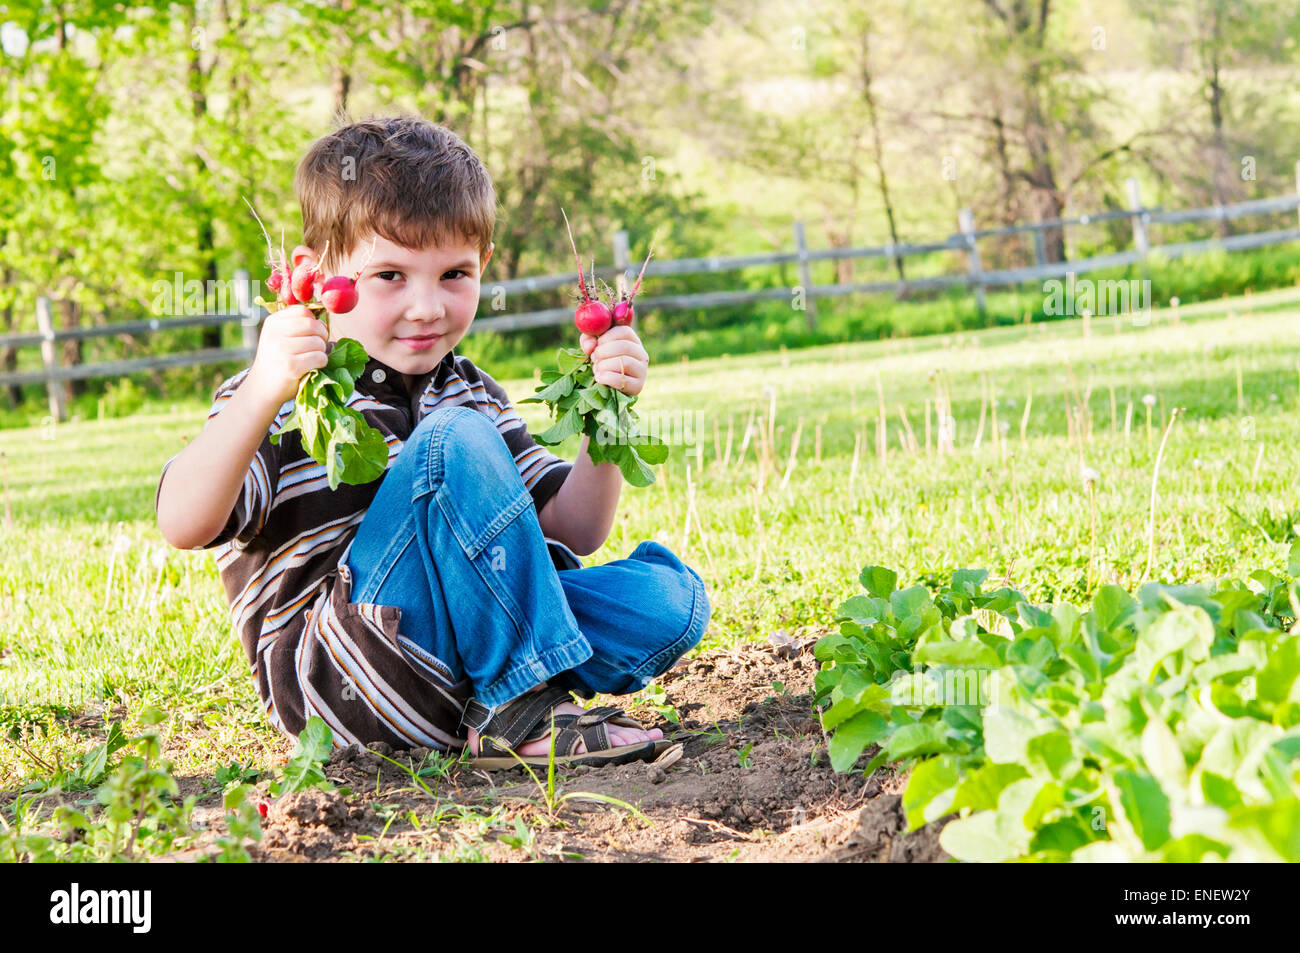 boy holding radishes pulled from garden Stock Photo